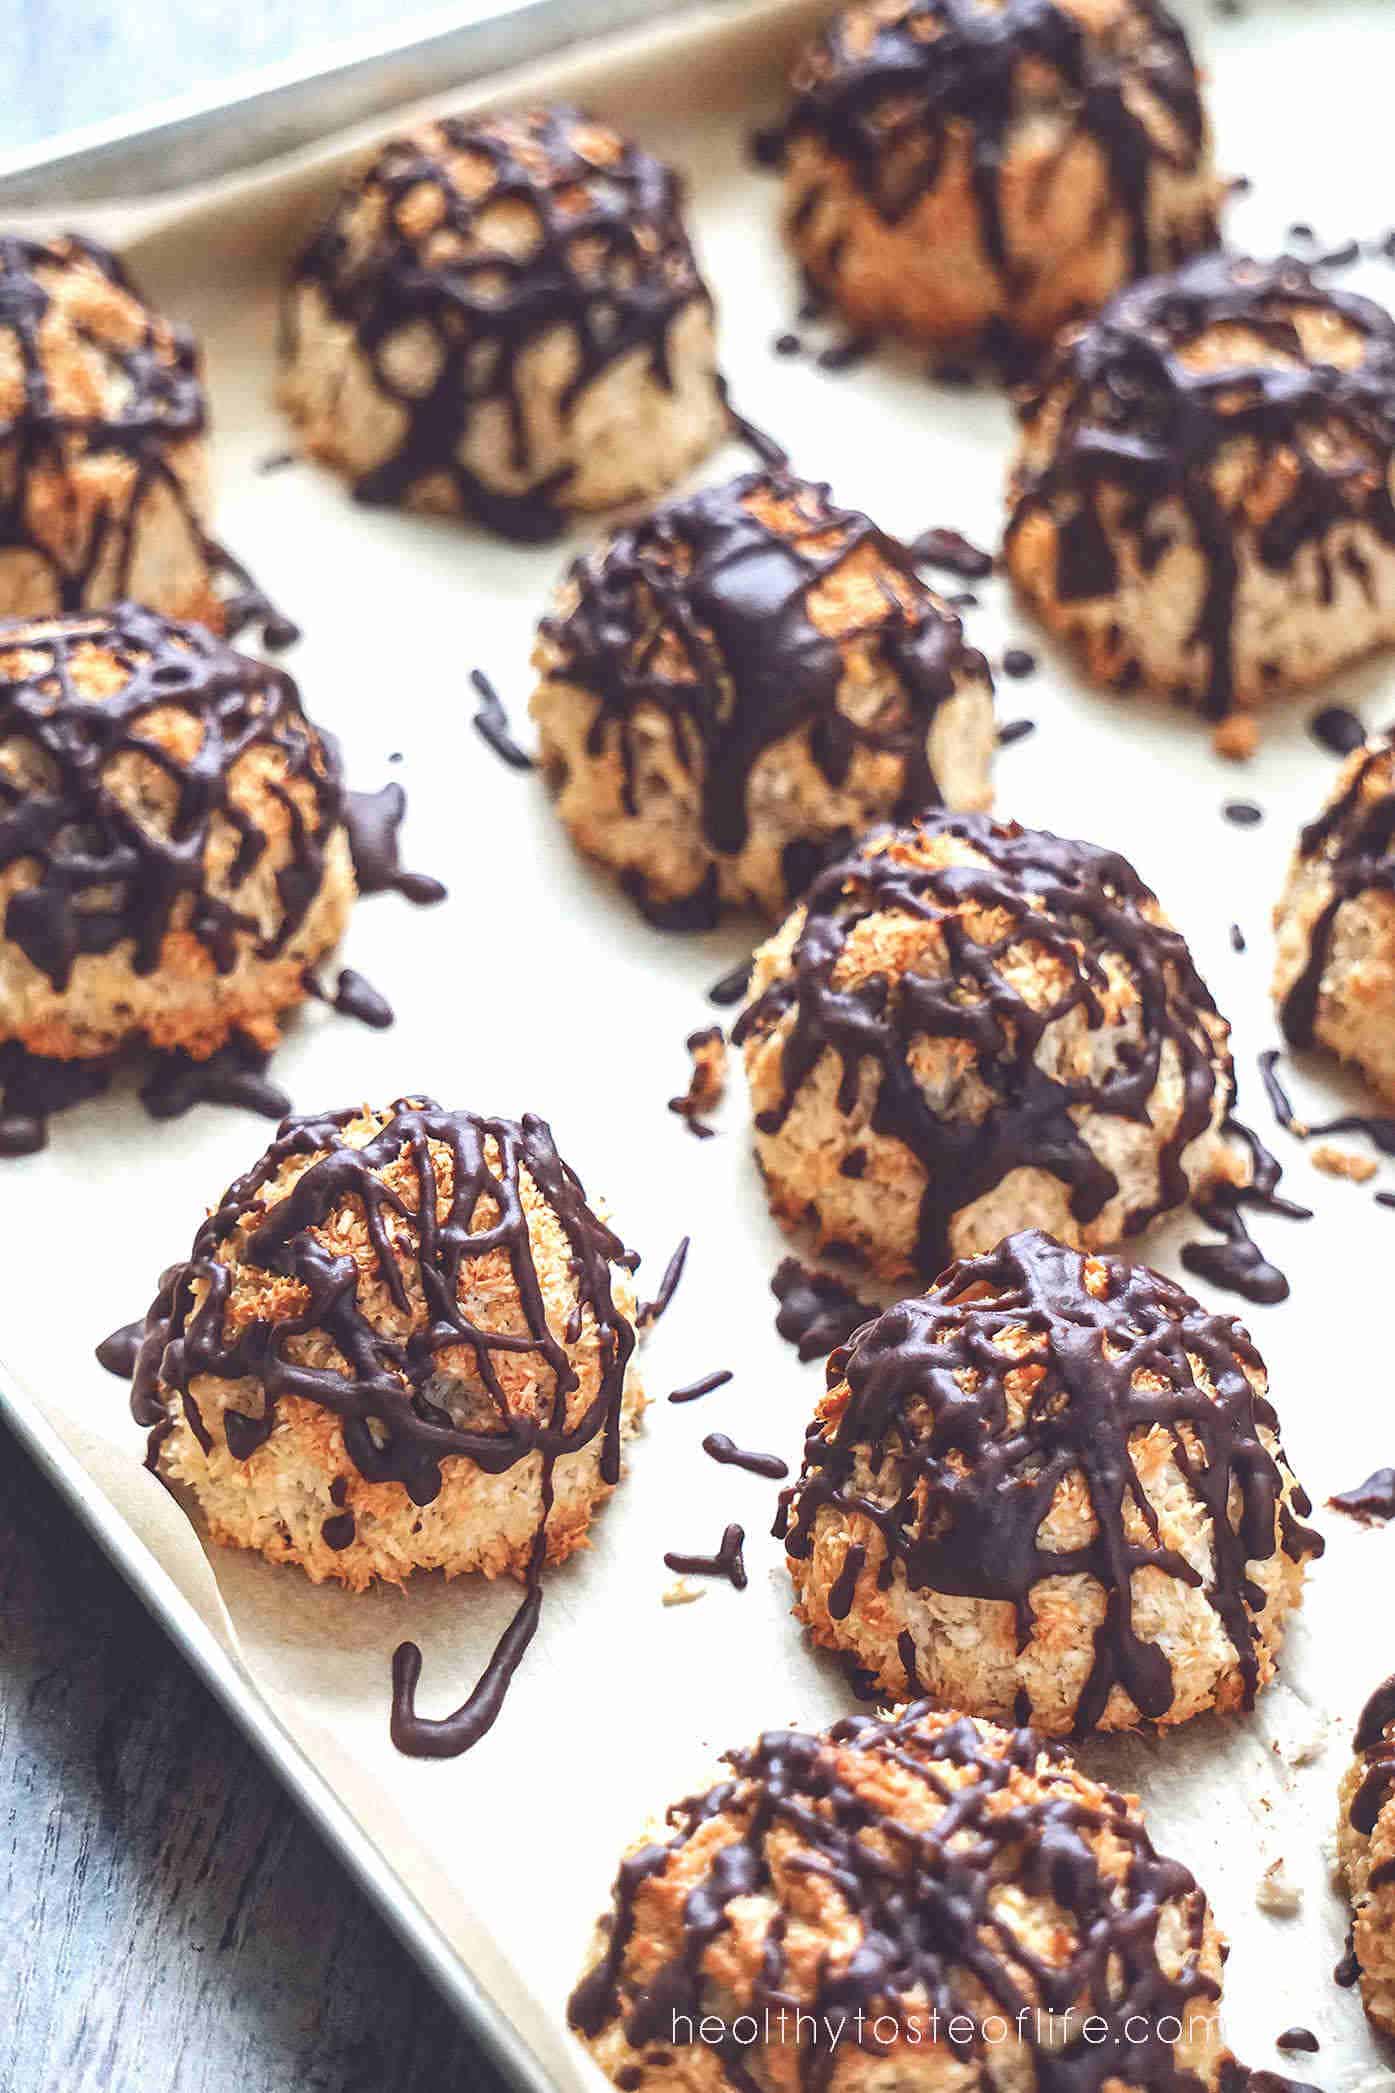 Healthy gluten free coconut macaroons recipe - low carb, dairy free made with egg whites and without condensed milk drizzled with chocolate.